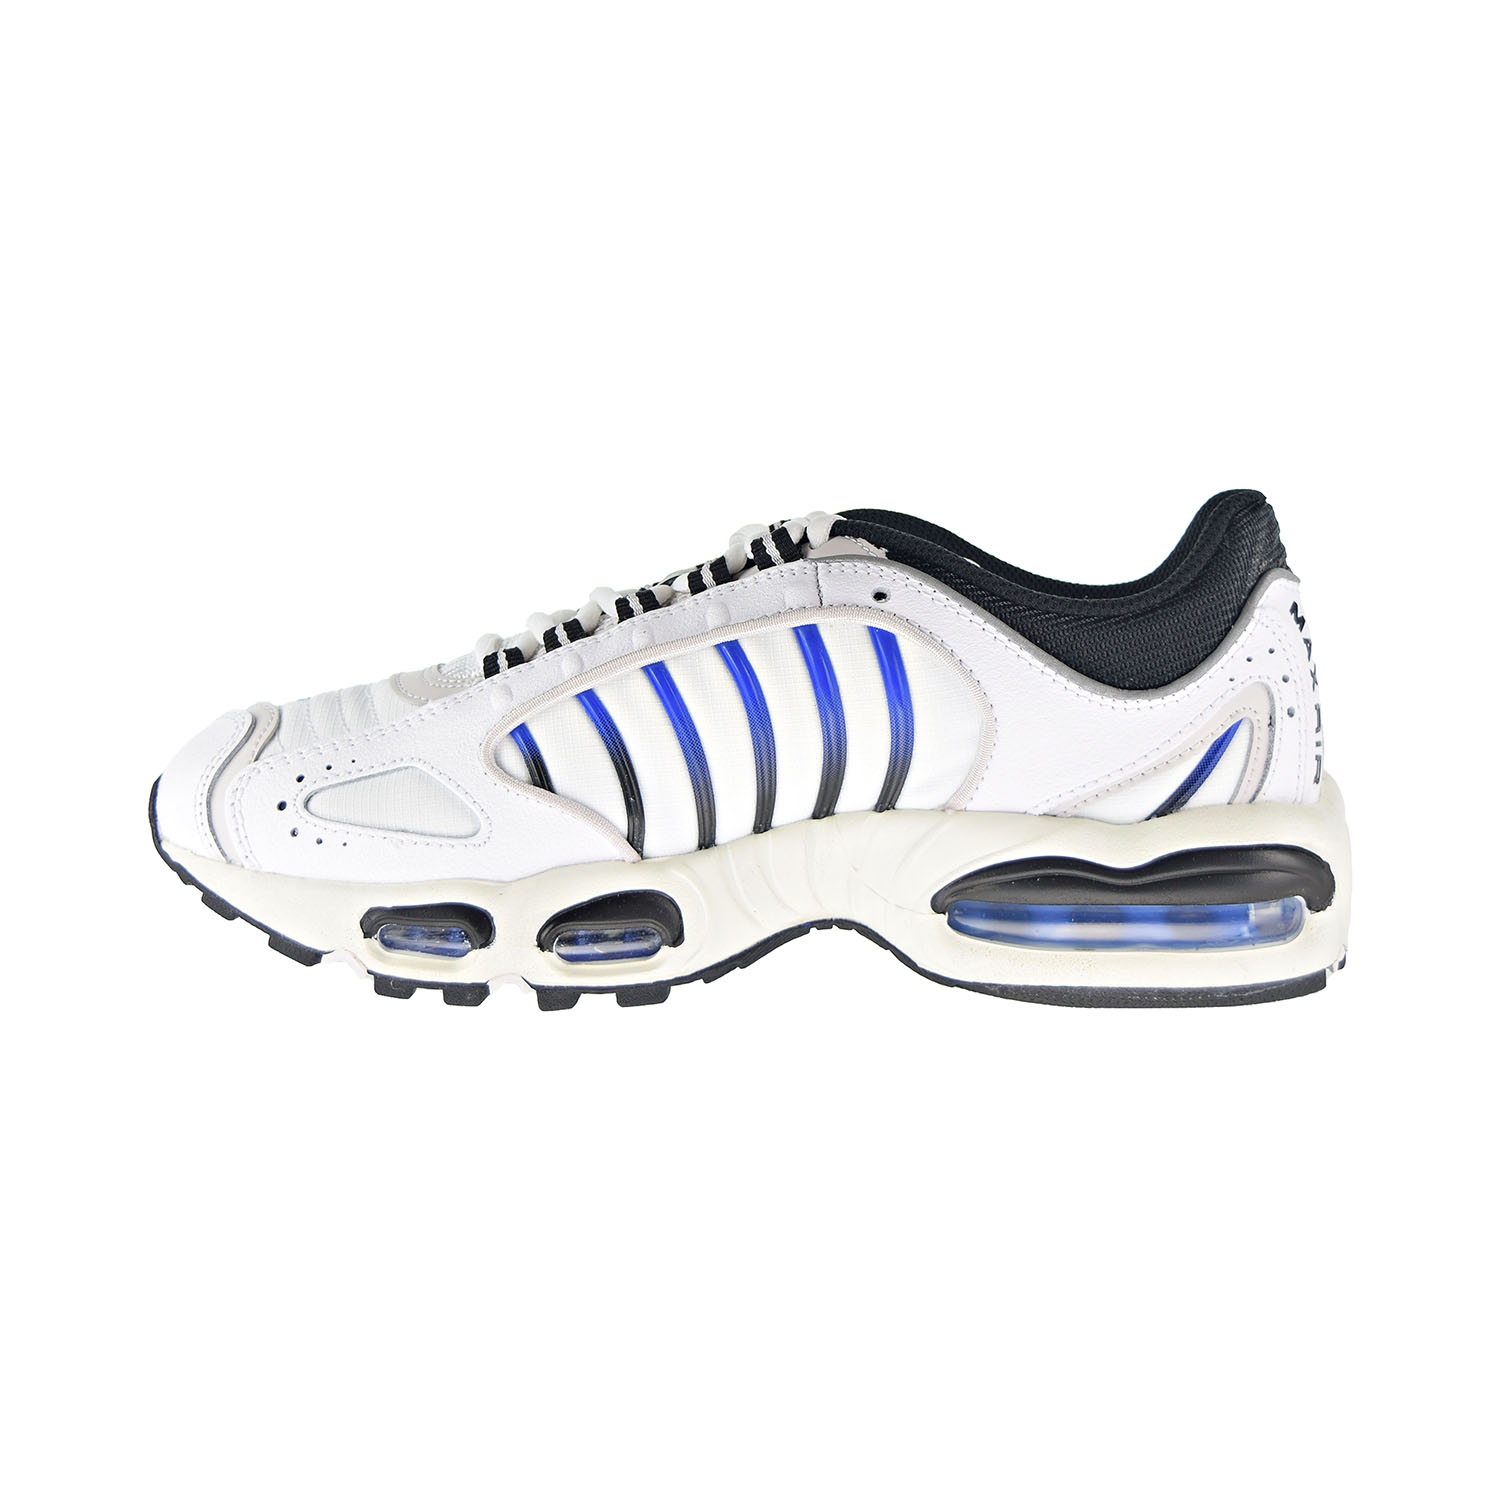 Nike Air Max Tailwind IV Men's Shoes White-Summit White-Vast aq2567-105 - image 4 of 6